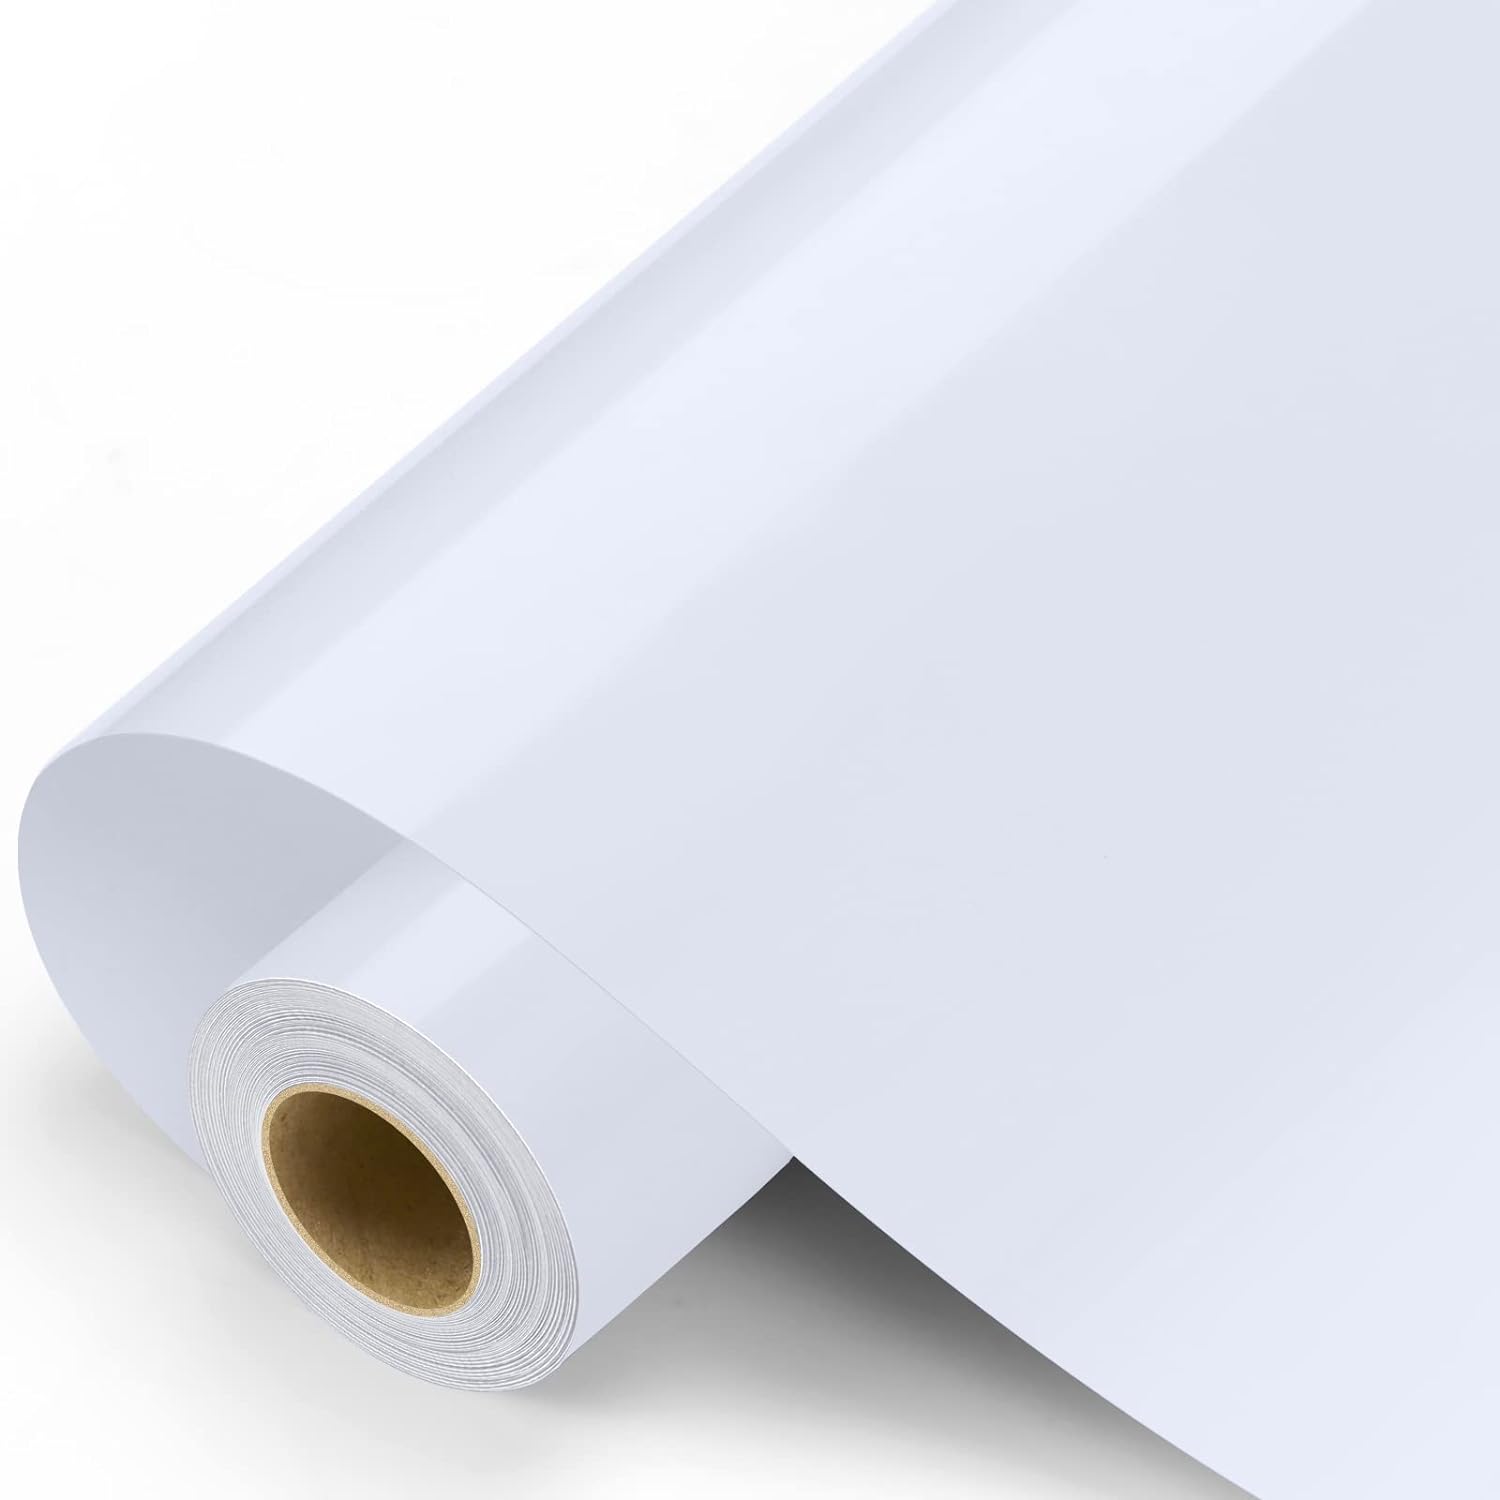 Sooez Glossy White Vinyl Roll, 12 x 11FT, PET Backing, Permanent Outdoor Vinyl for Home Decor, Car Decal, Scrapbooking, Window Graphics, Modern, Unisex, Indoor and Outdoor Use